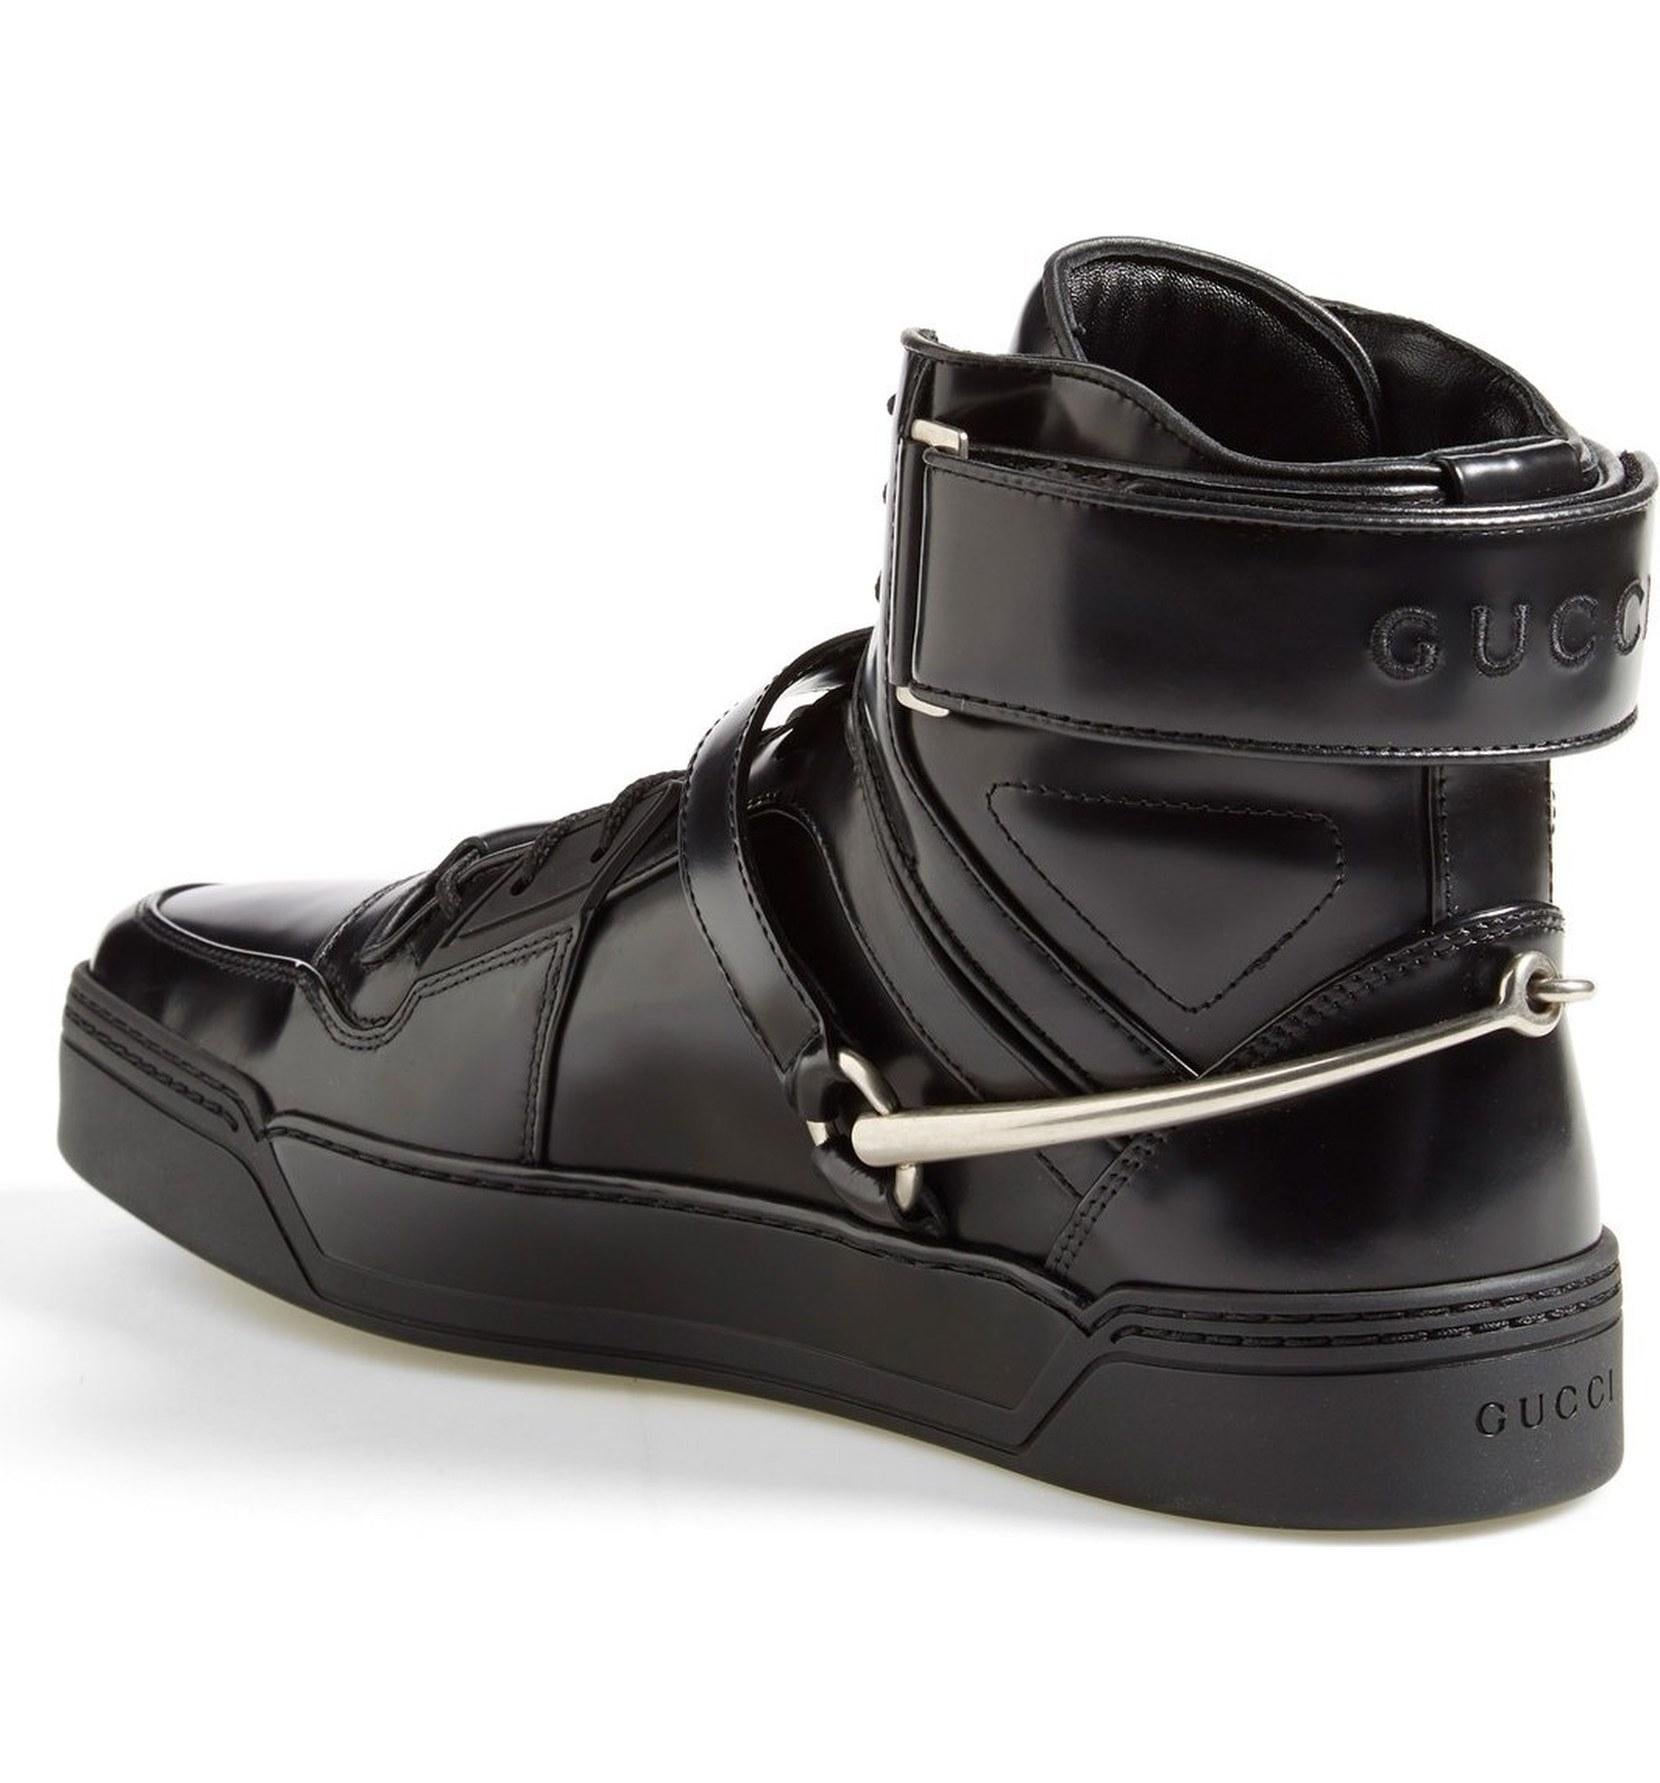 New GUCCI Men's *BASKET DARKO* Black High-Top Sneaker
Model N# 407373 DKS10
GUCCI sizes Available 8.5 G, 9.5 G - US 9.5 G,  10.5 G (please check Gucci size Guide)
100% Magnum-Calf Black Shiny Leather
Lace-Up Front with Strap and Buckle Closure